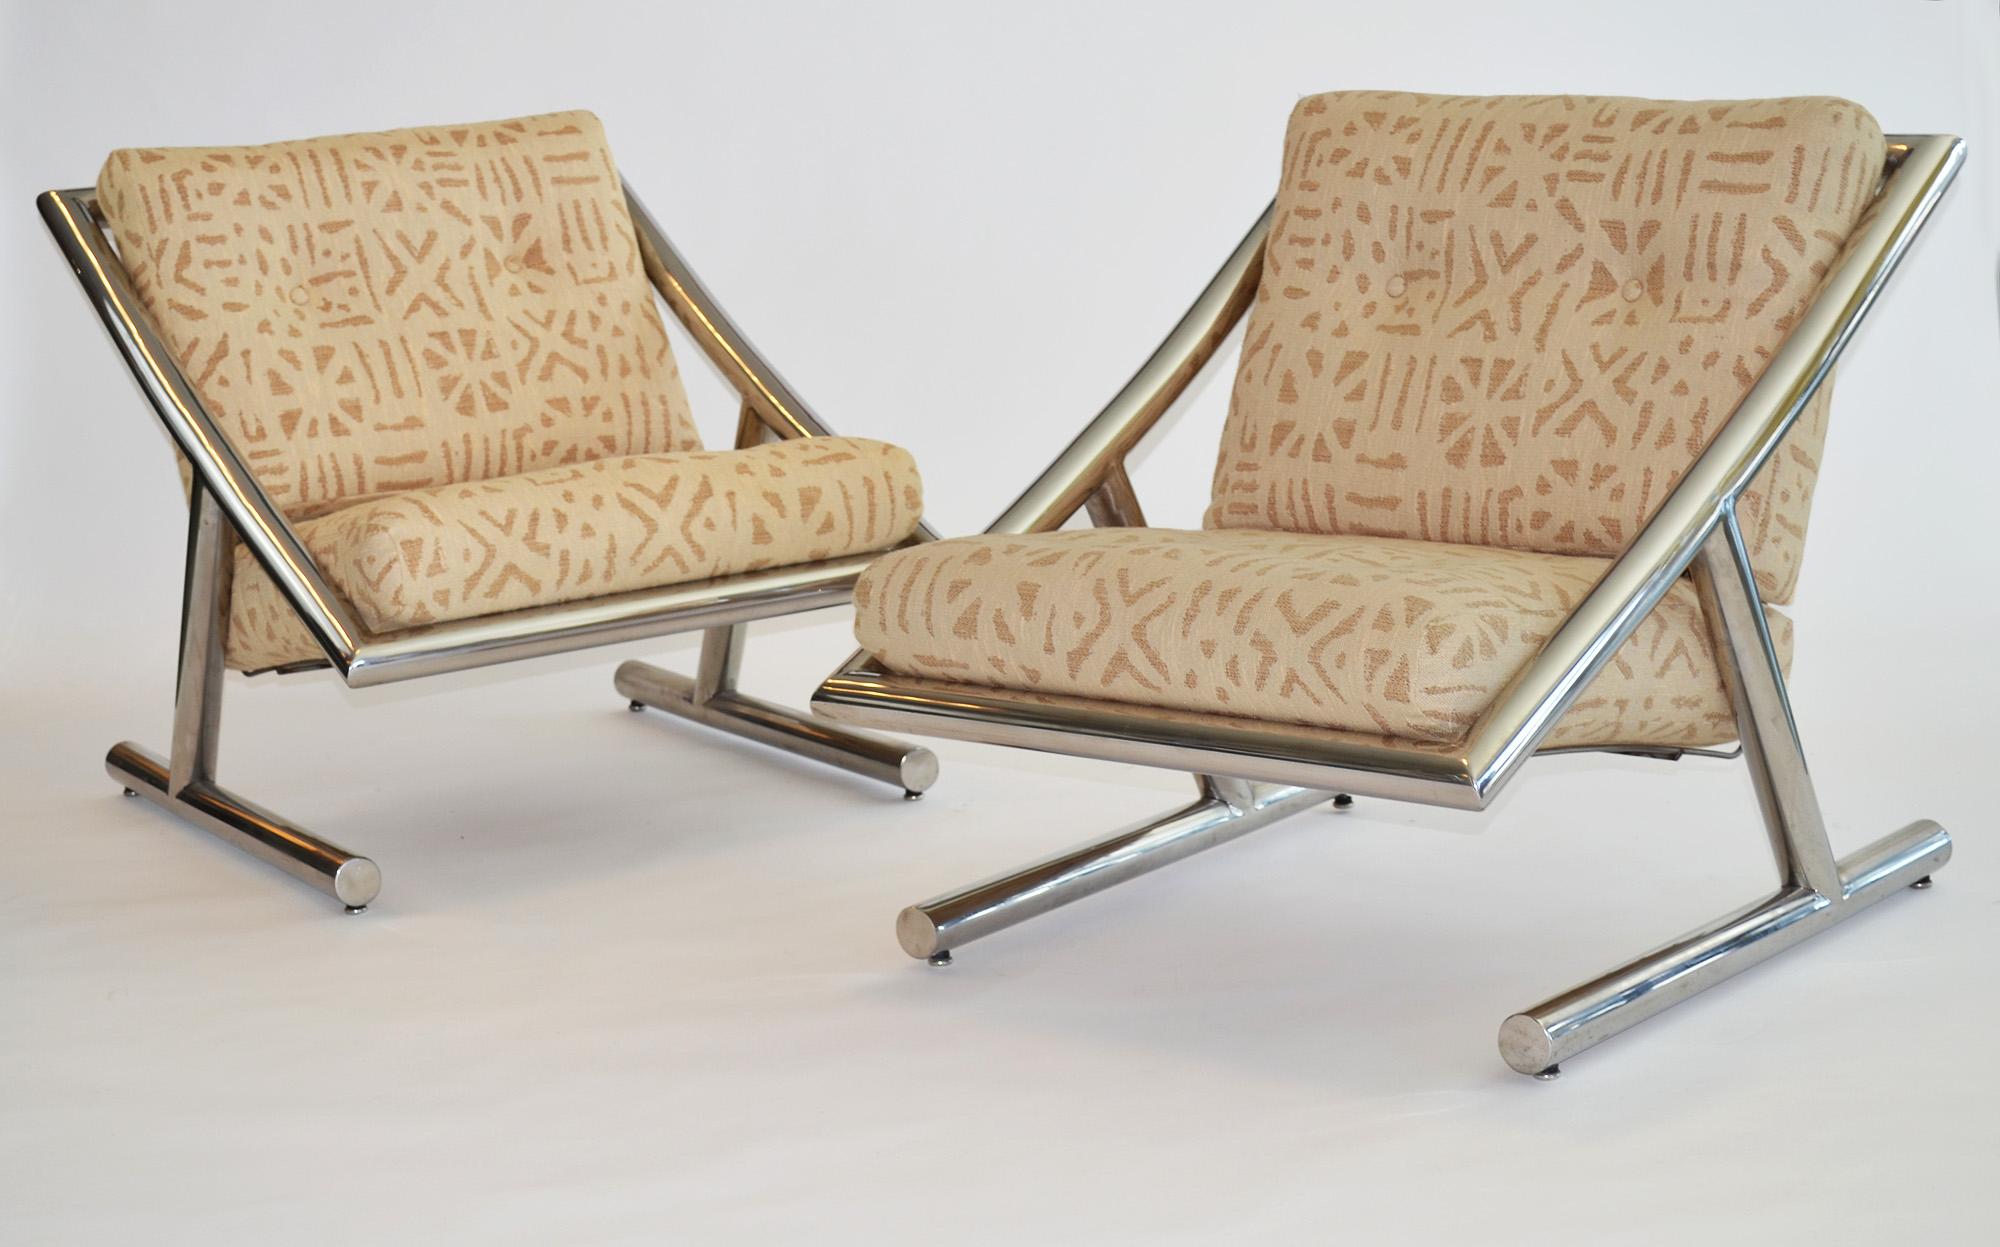 Pair of Arthur Umanoff chrome lounge chairs, Directional, 1970s. This pair of low chairs by Arthur Umanoff for Directional Furniture in tubular chrome frame and chrome rod back supports are upholstered in Jack Lenor Larsen abstract cotton/linen